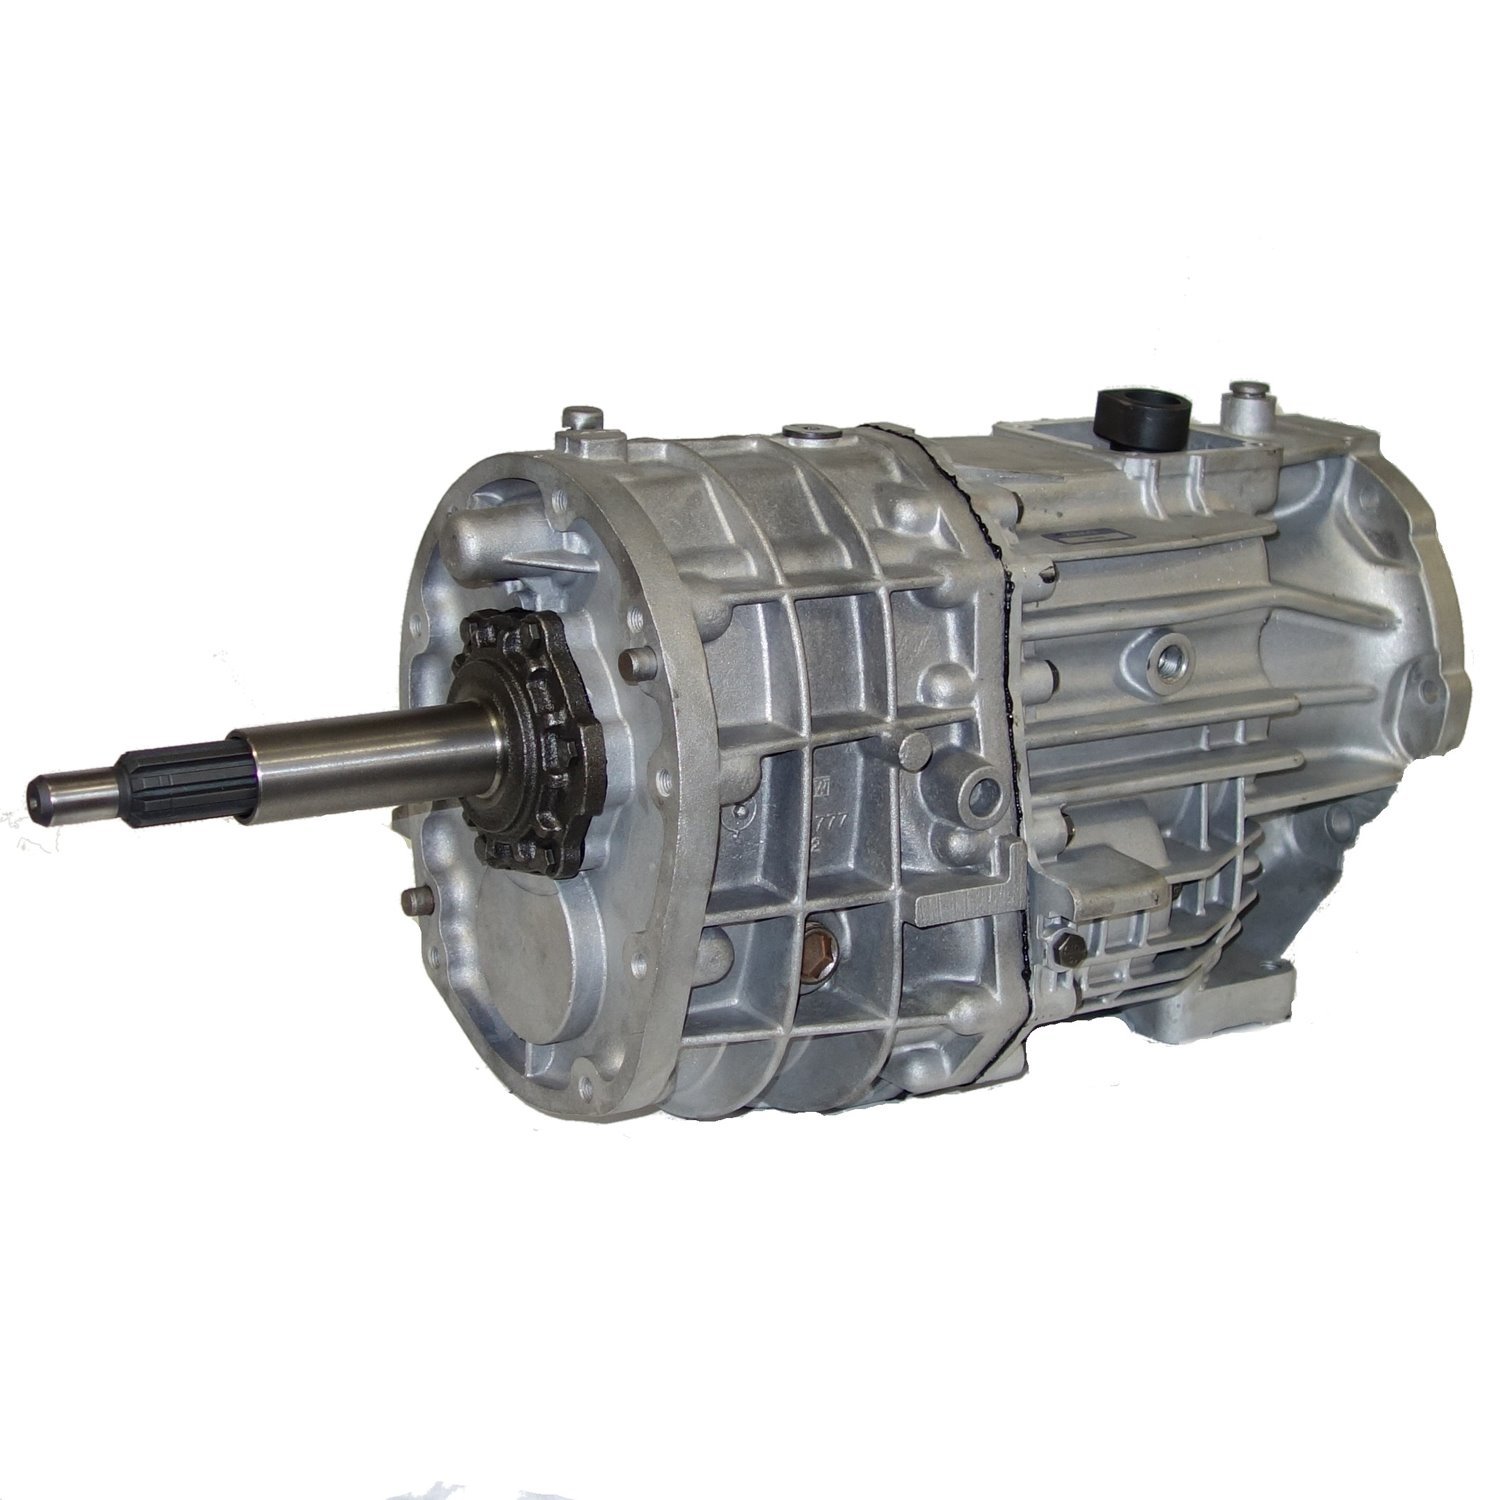 Remanufactured NV3550 Manual Transmission for Jeep 02-04 Liberty, 2WD, 5 Speed